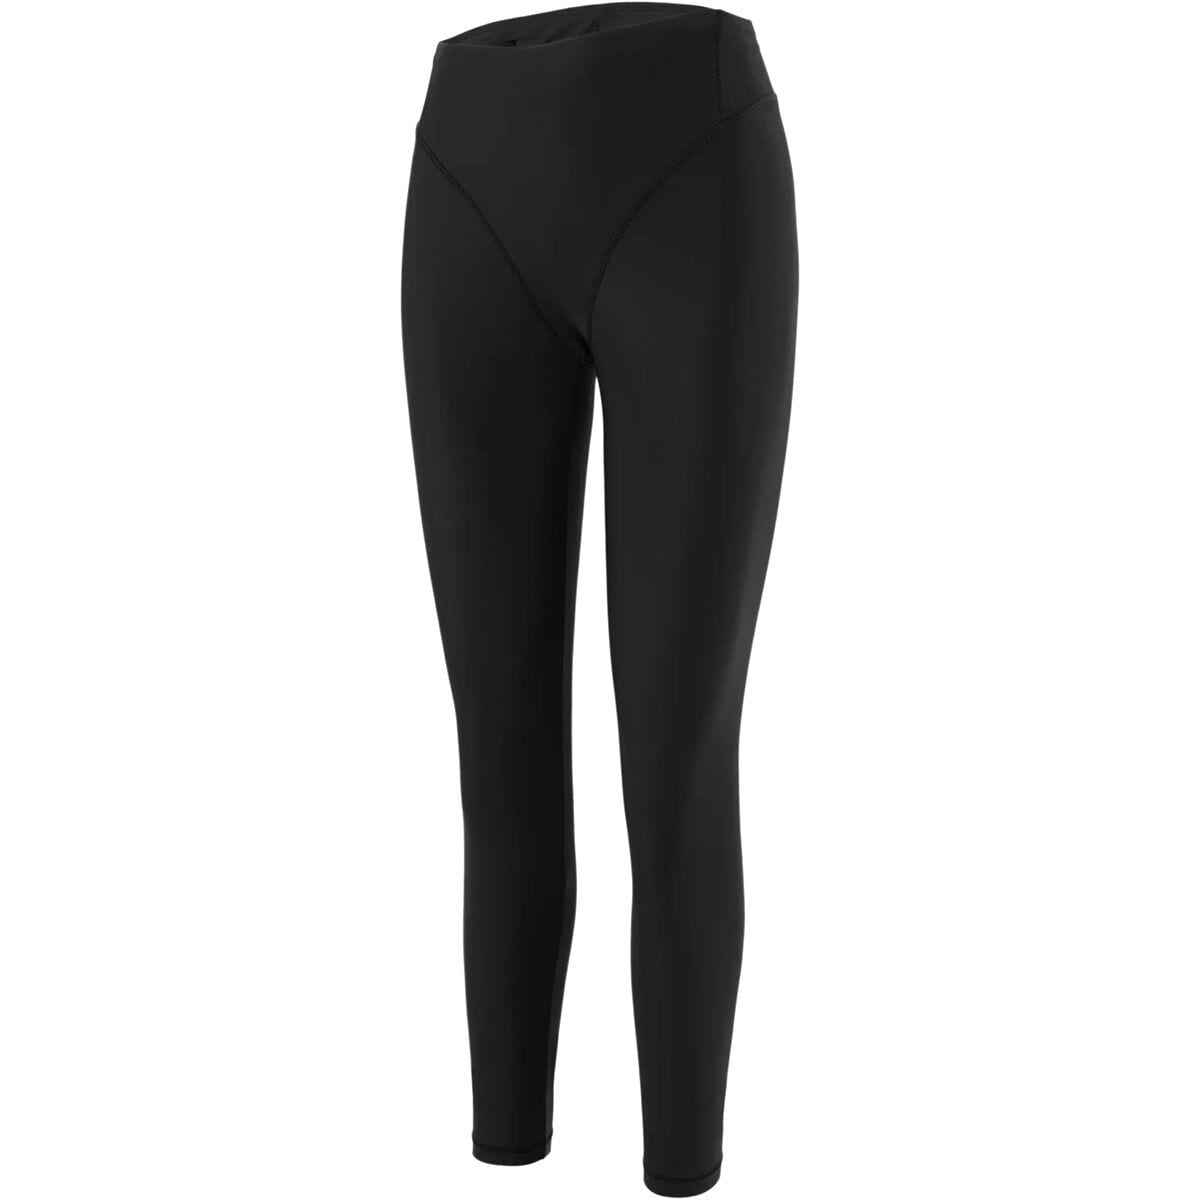 District Vision Recycled Pocketed Full Length Tight - Women's